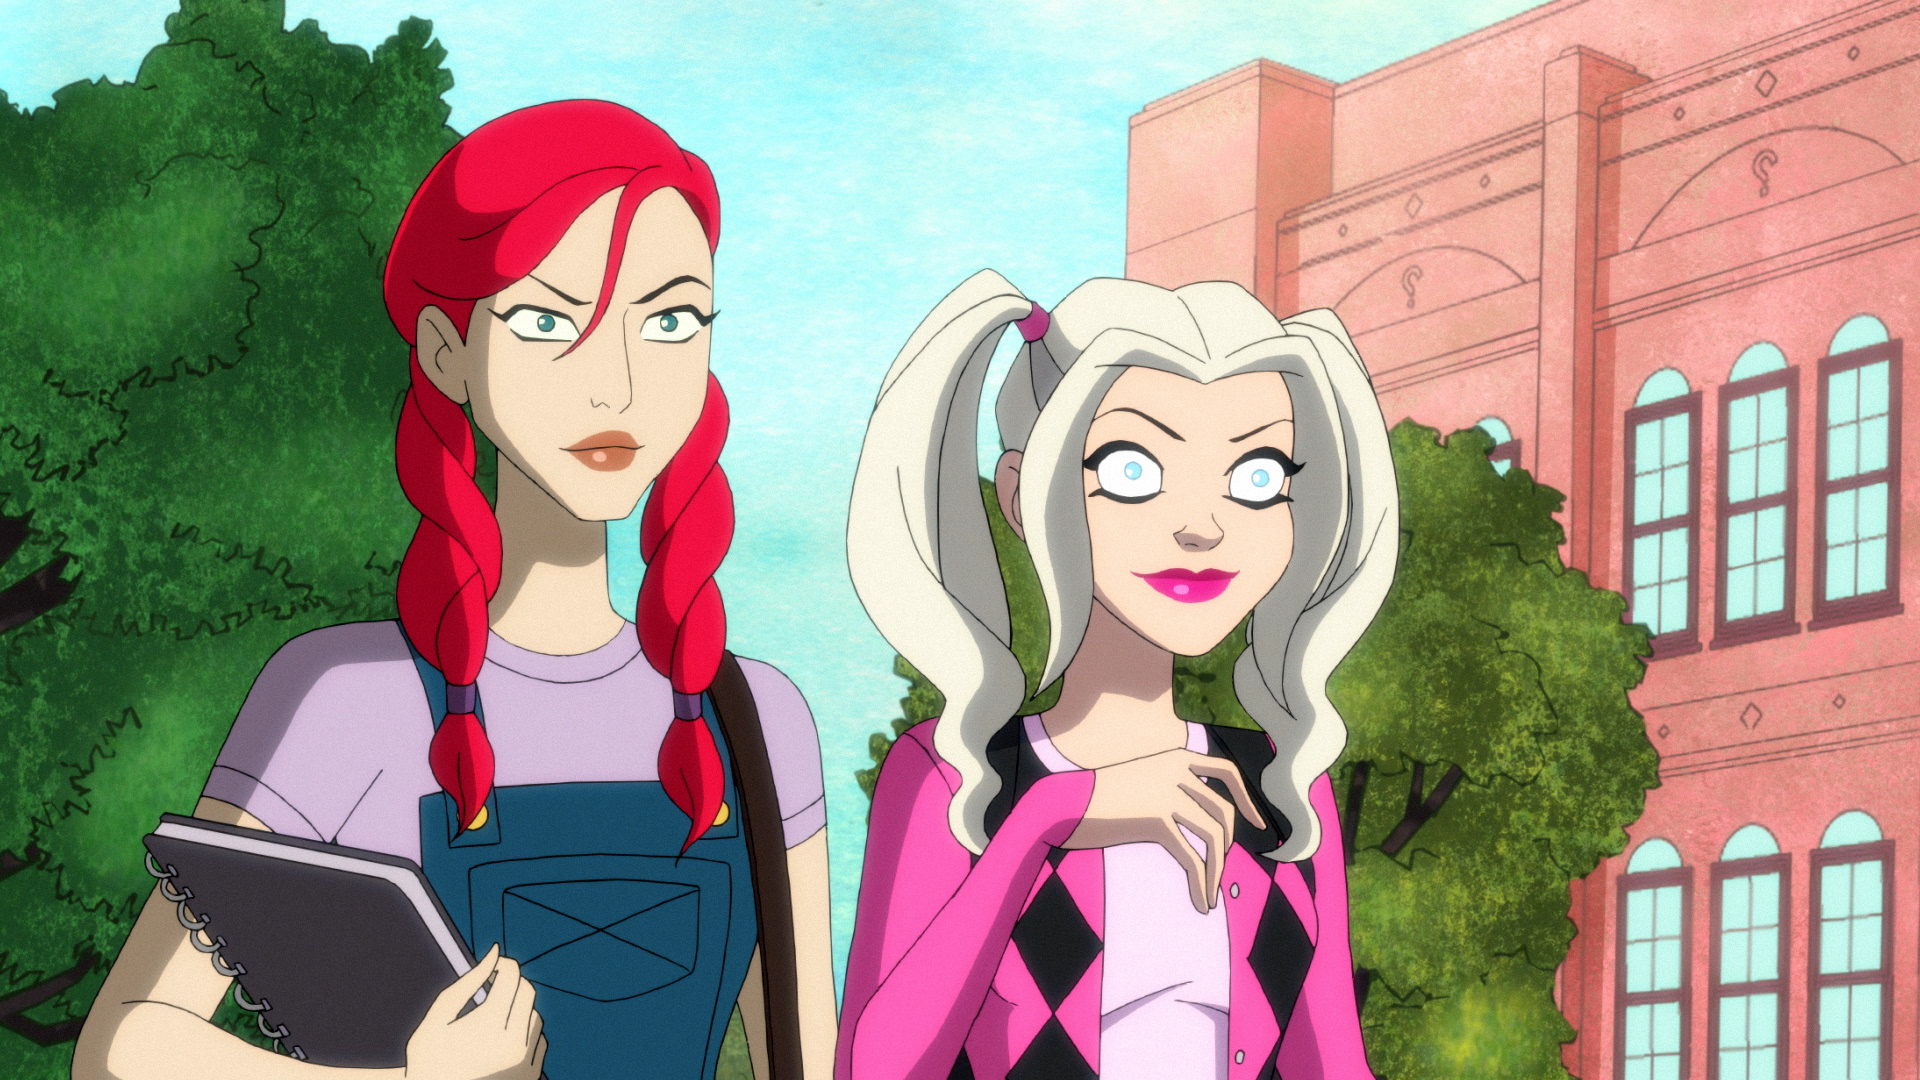 Poison Ivy and Harley Quinn undercover at Riddler University in Season 2